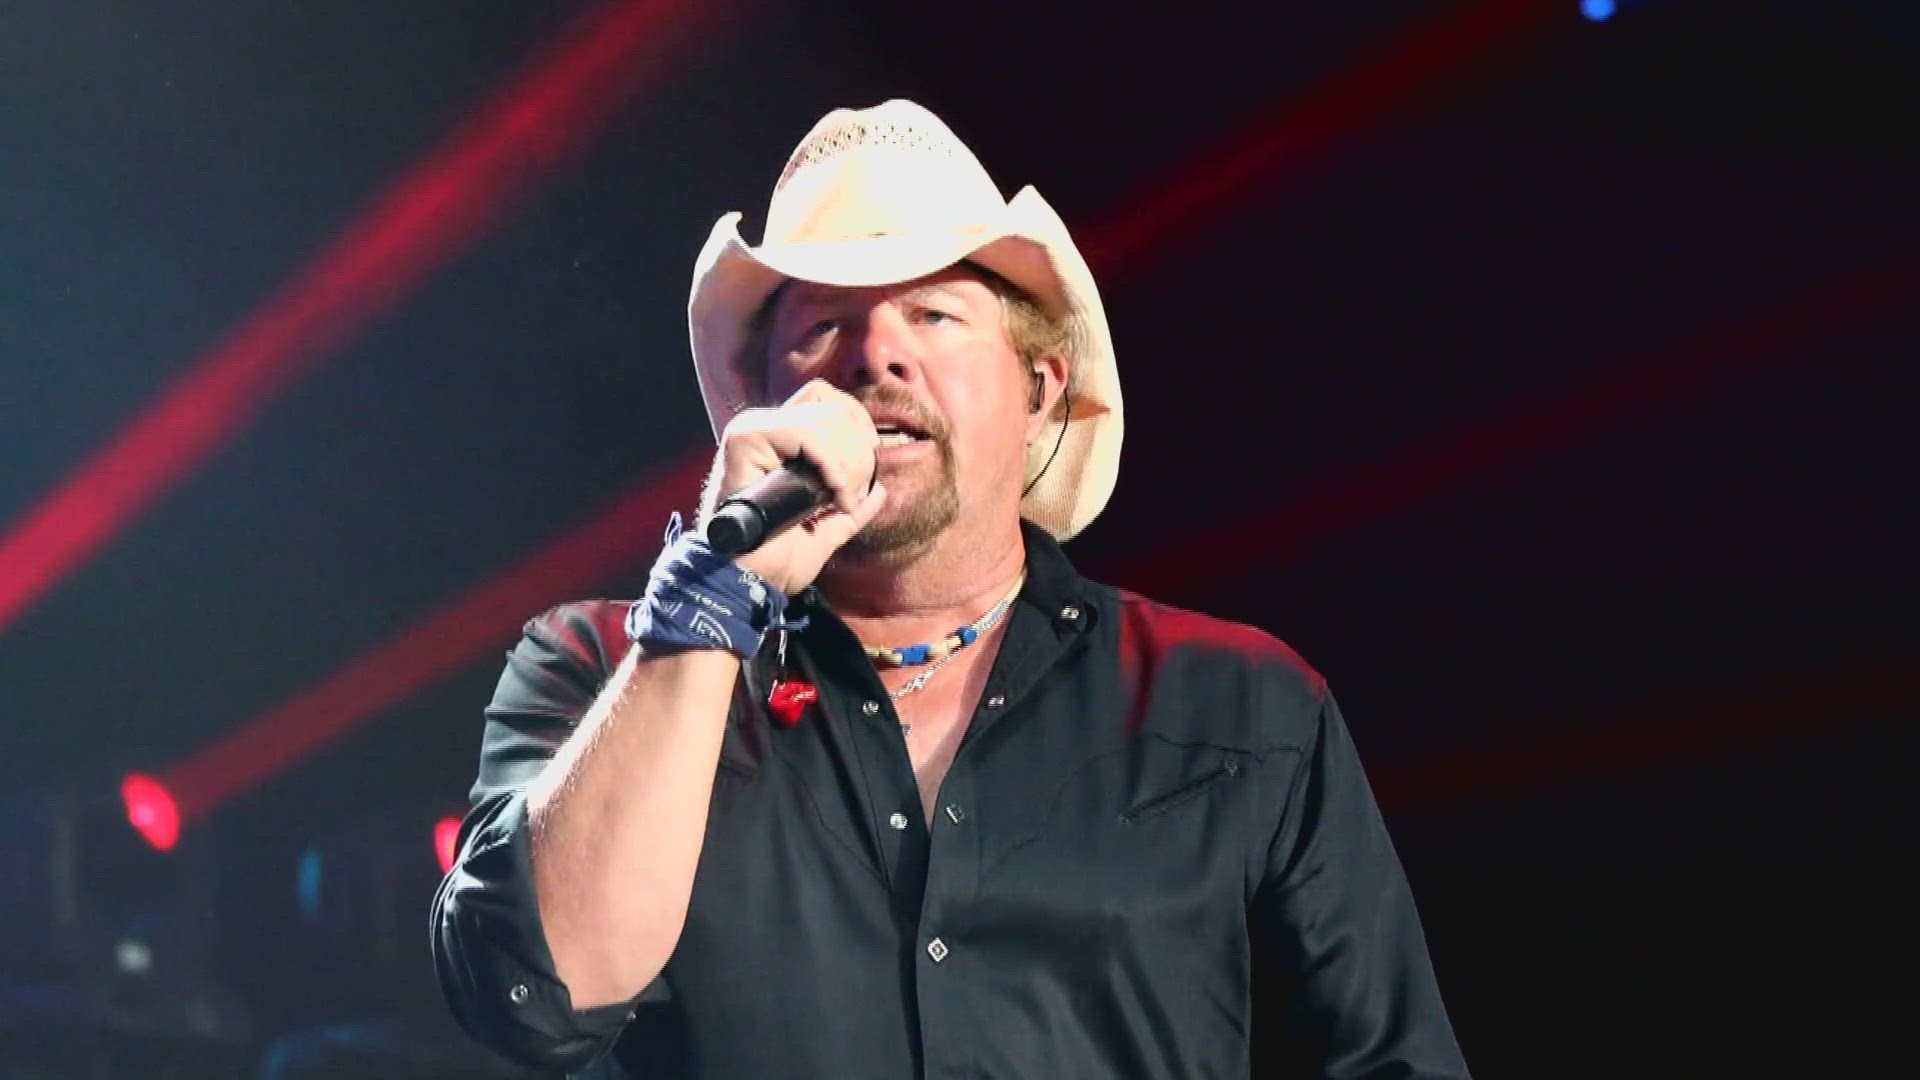 Throughout his cancer treatments, 62-year-old Toby Keith continued to perform, most recently playing in Las Vegas in December.